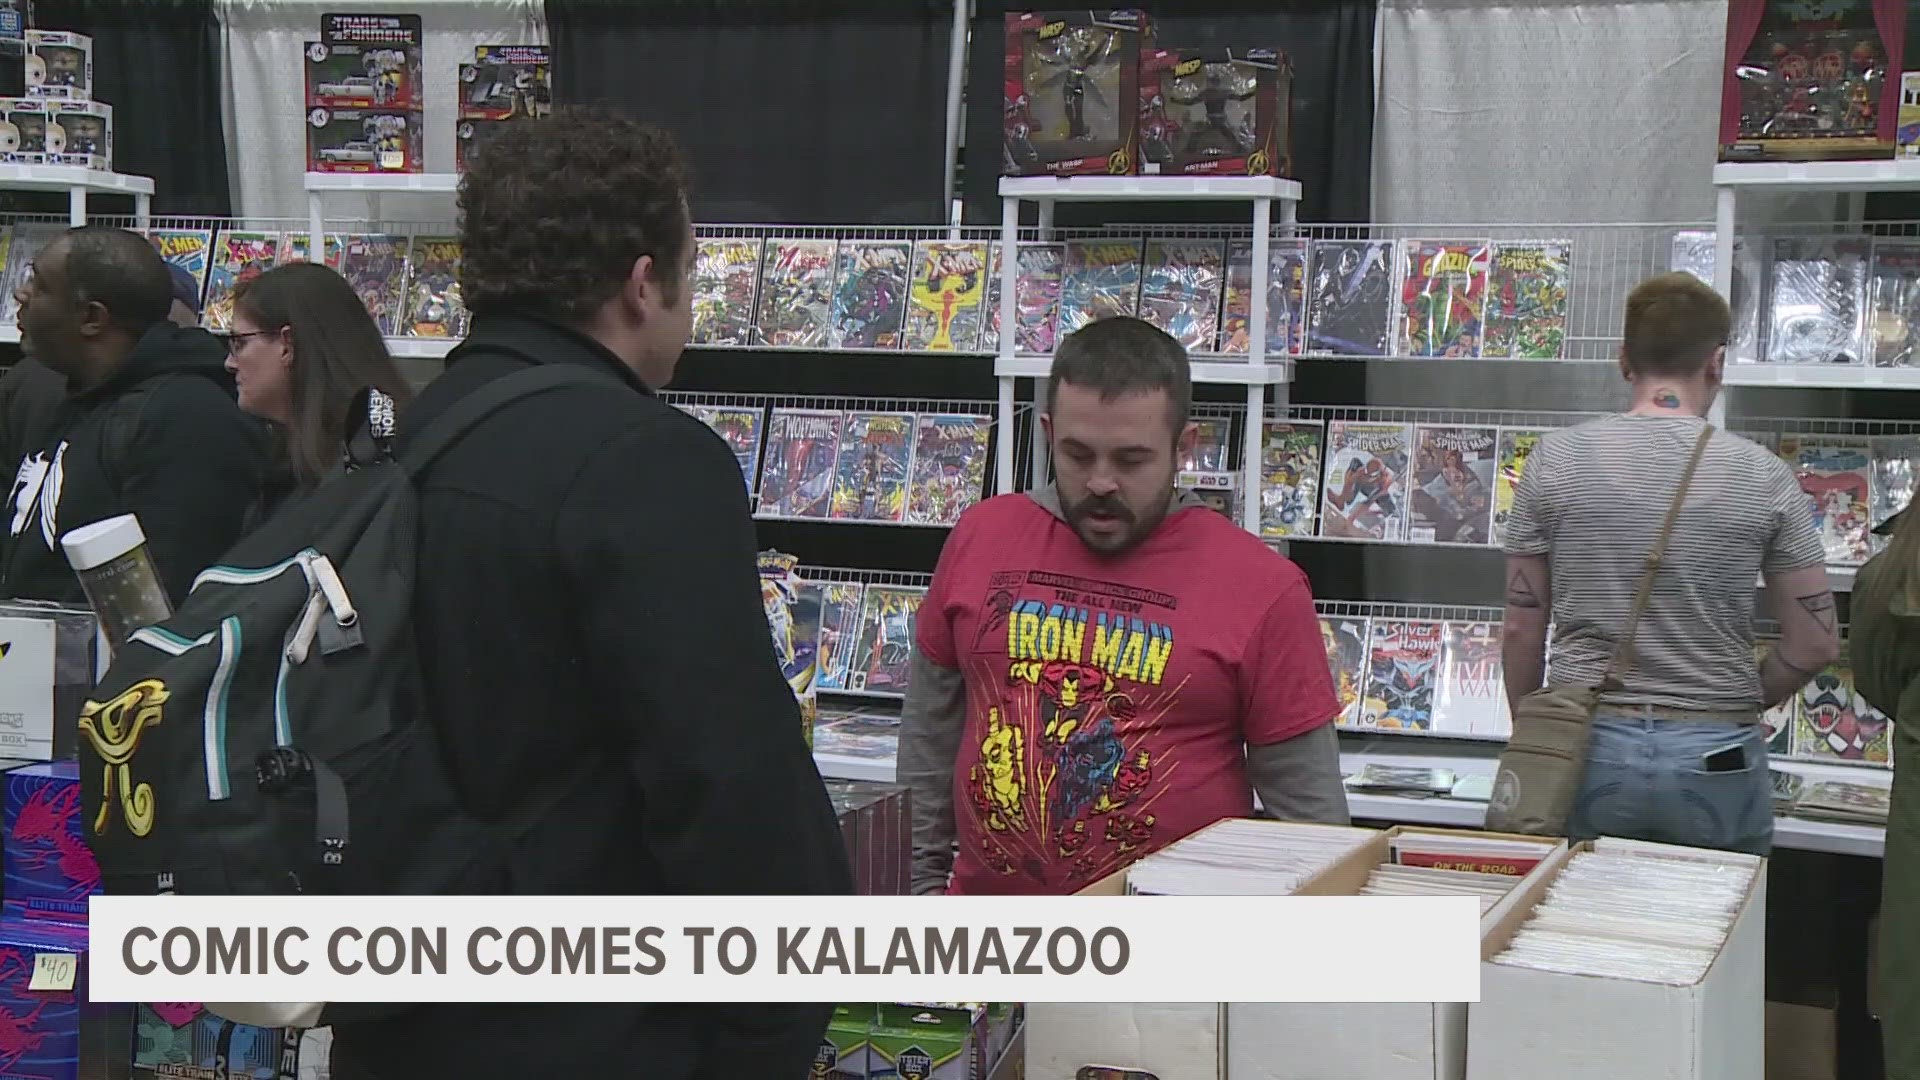 Grand Rapids Comic-Con is taking the show on the road this year and hosting a three day convention at the Kalamazoo County Expo Center.